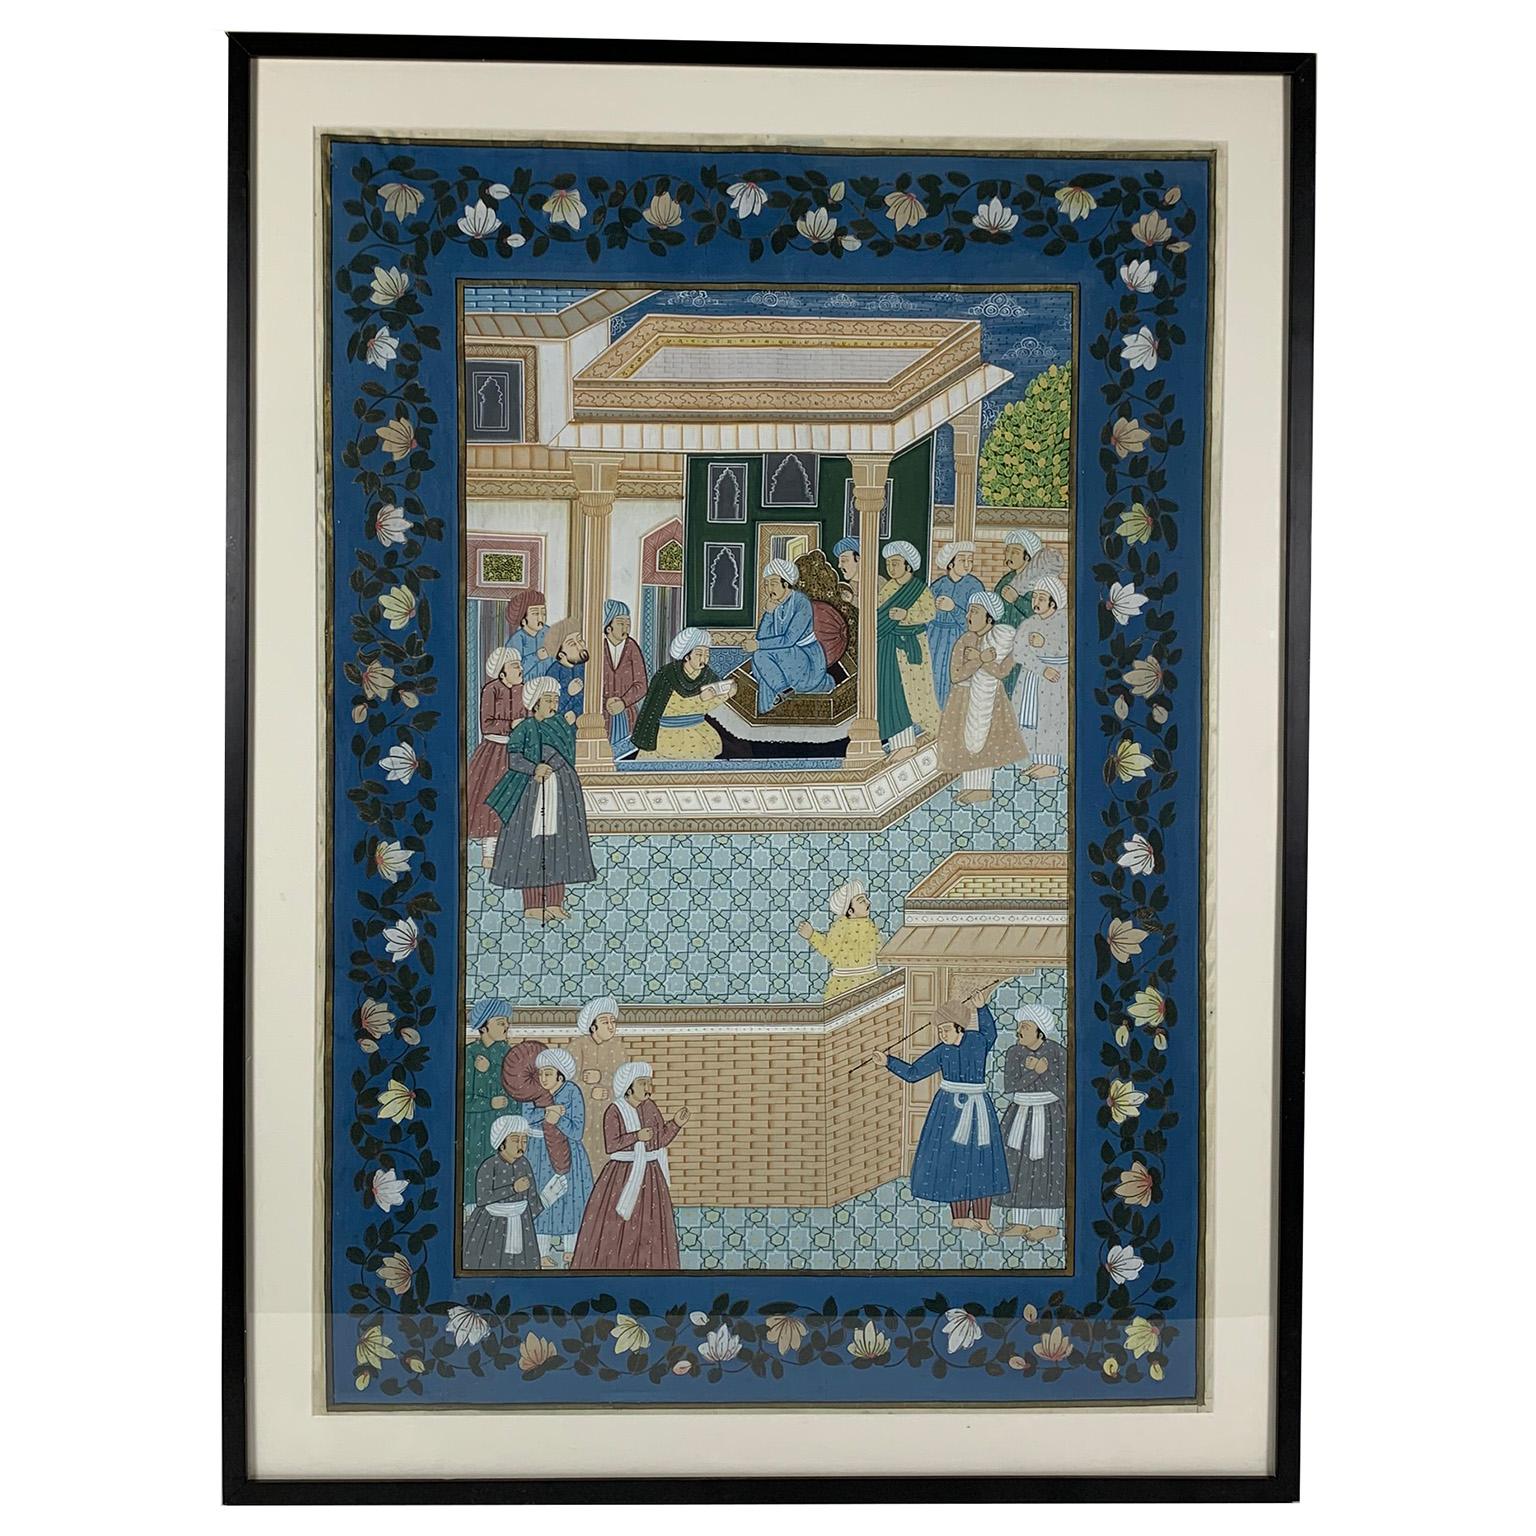 John Wissemann (American, 20th century) Pesian Illumination. Colored Pencil Drawing on linen depicting turbaned gentleman paying tribute to a seated royal. The work is unsigned, 40 x 29 inches, framed: 46 1/2 x 34 x 1 inch. 

Note: Wissemann is a